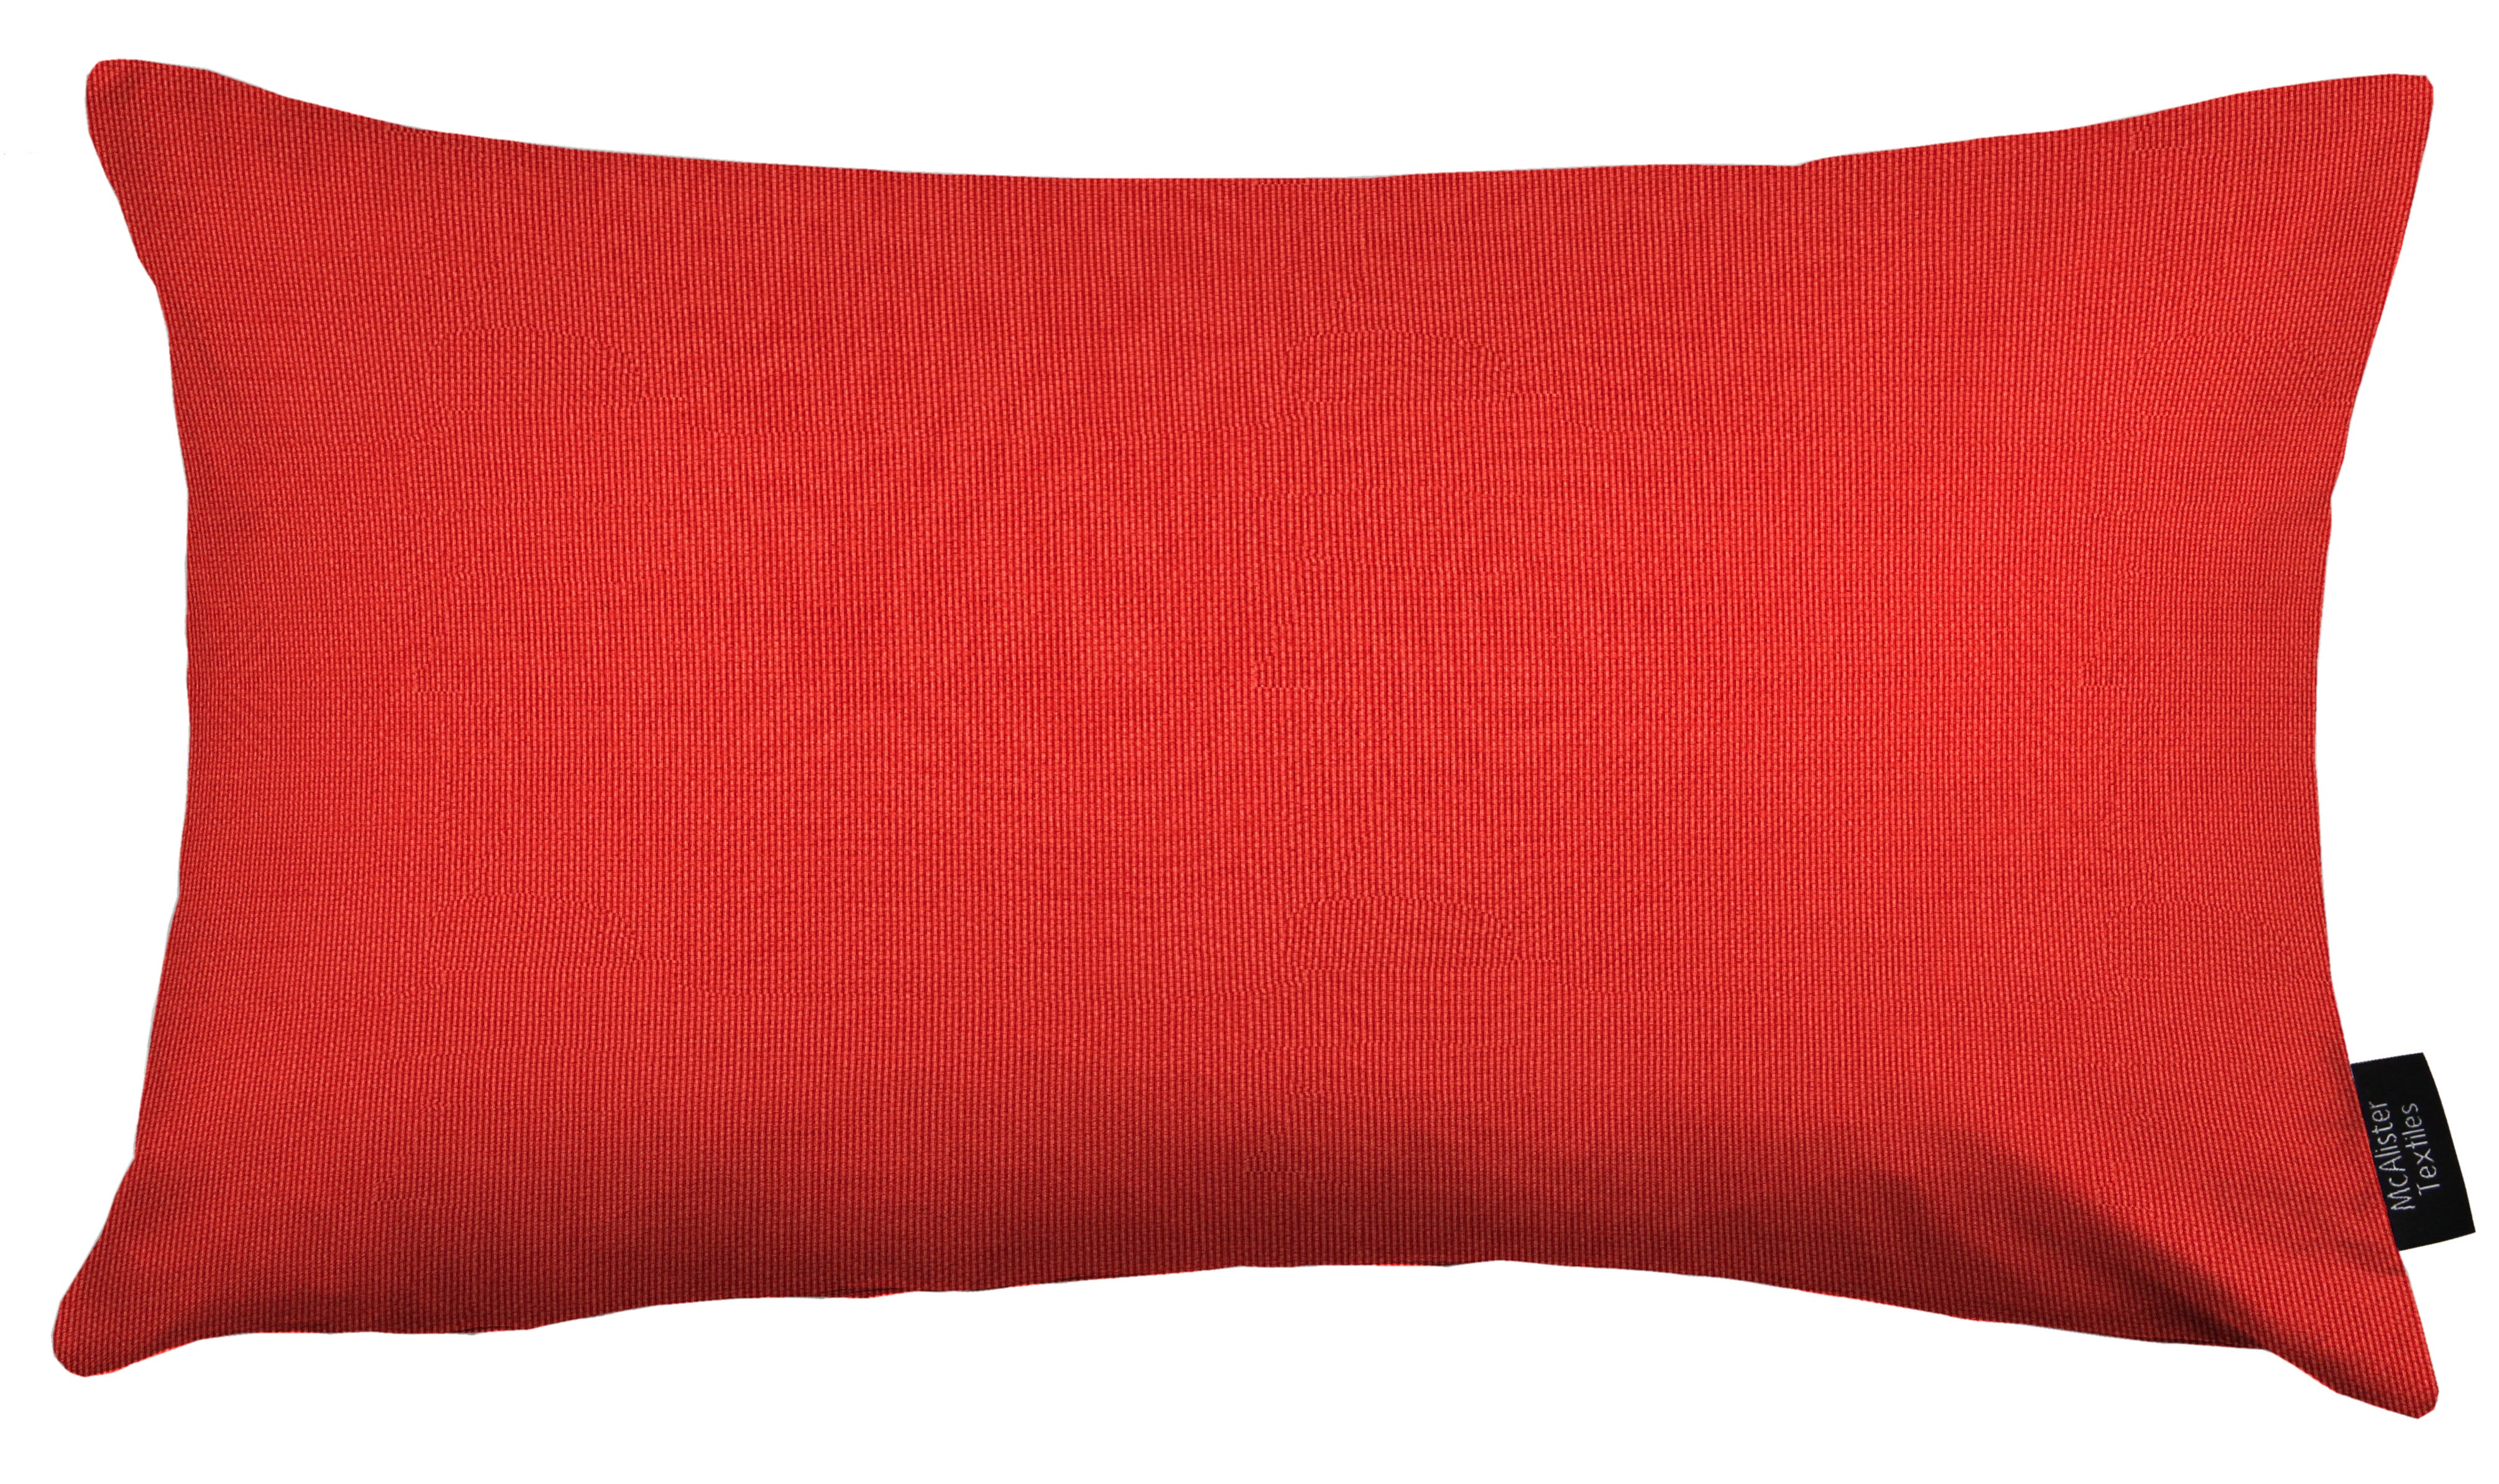 McAlister Textiles Sorrento Red Outdoor Pillows Pillow Cover Only 50cm x 30cm 